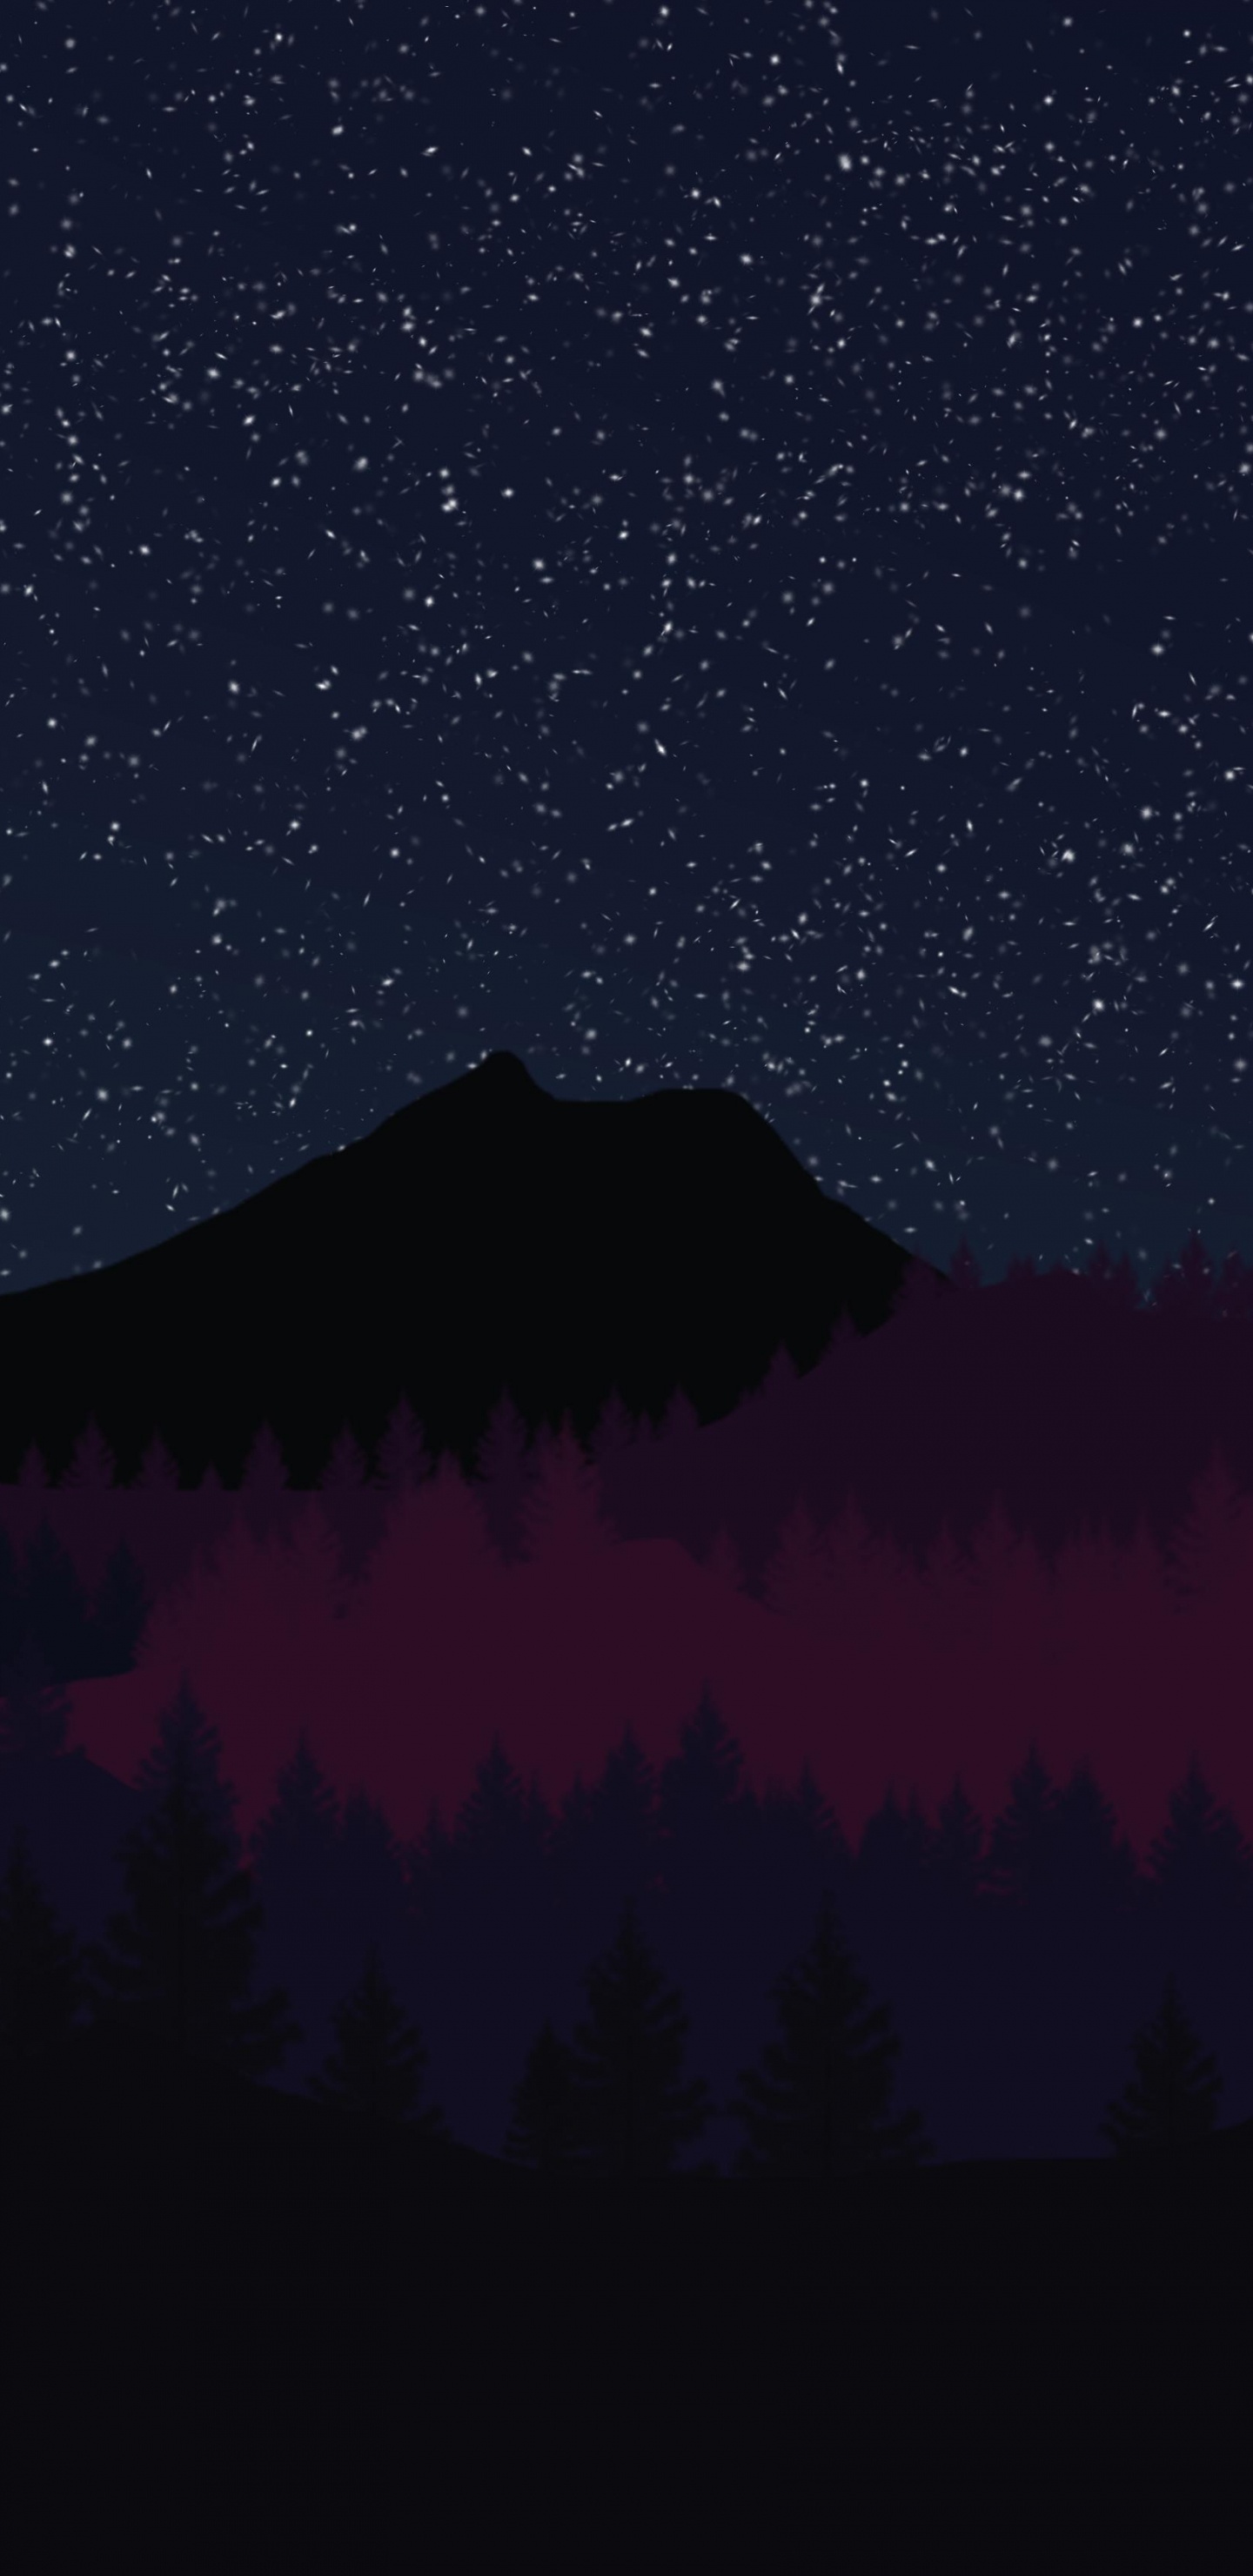 Silhouette of Trees Under Starry Night. Wallpaper in 1440x2960 Resolution